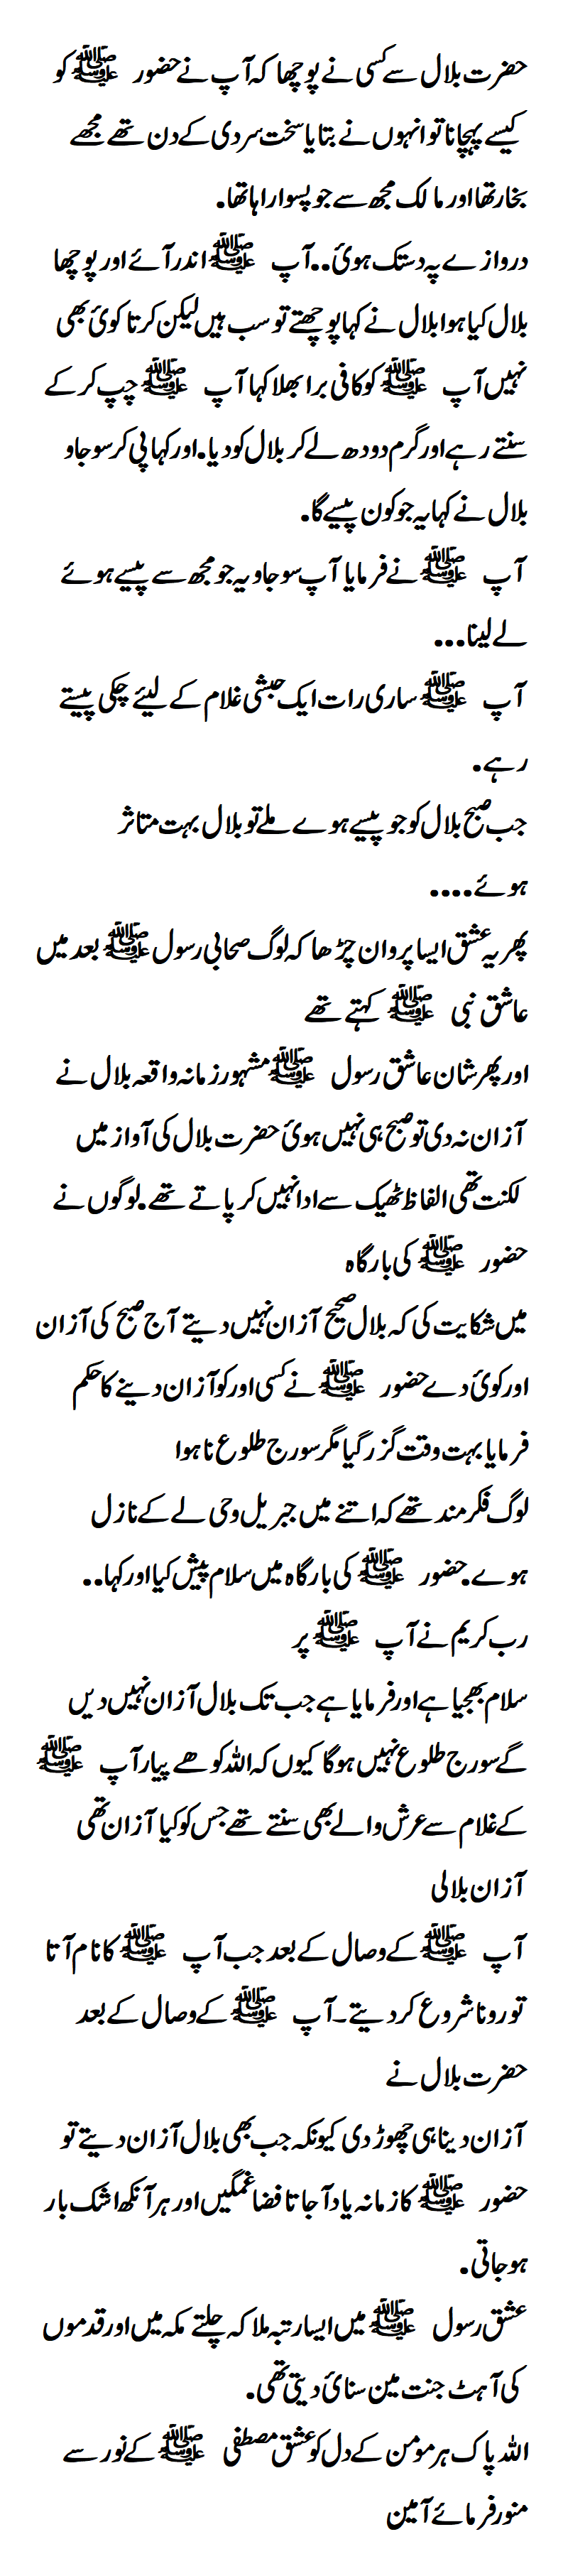 Someone asked Hazrat Bilal how he recognized the Holy Prophet